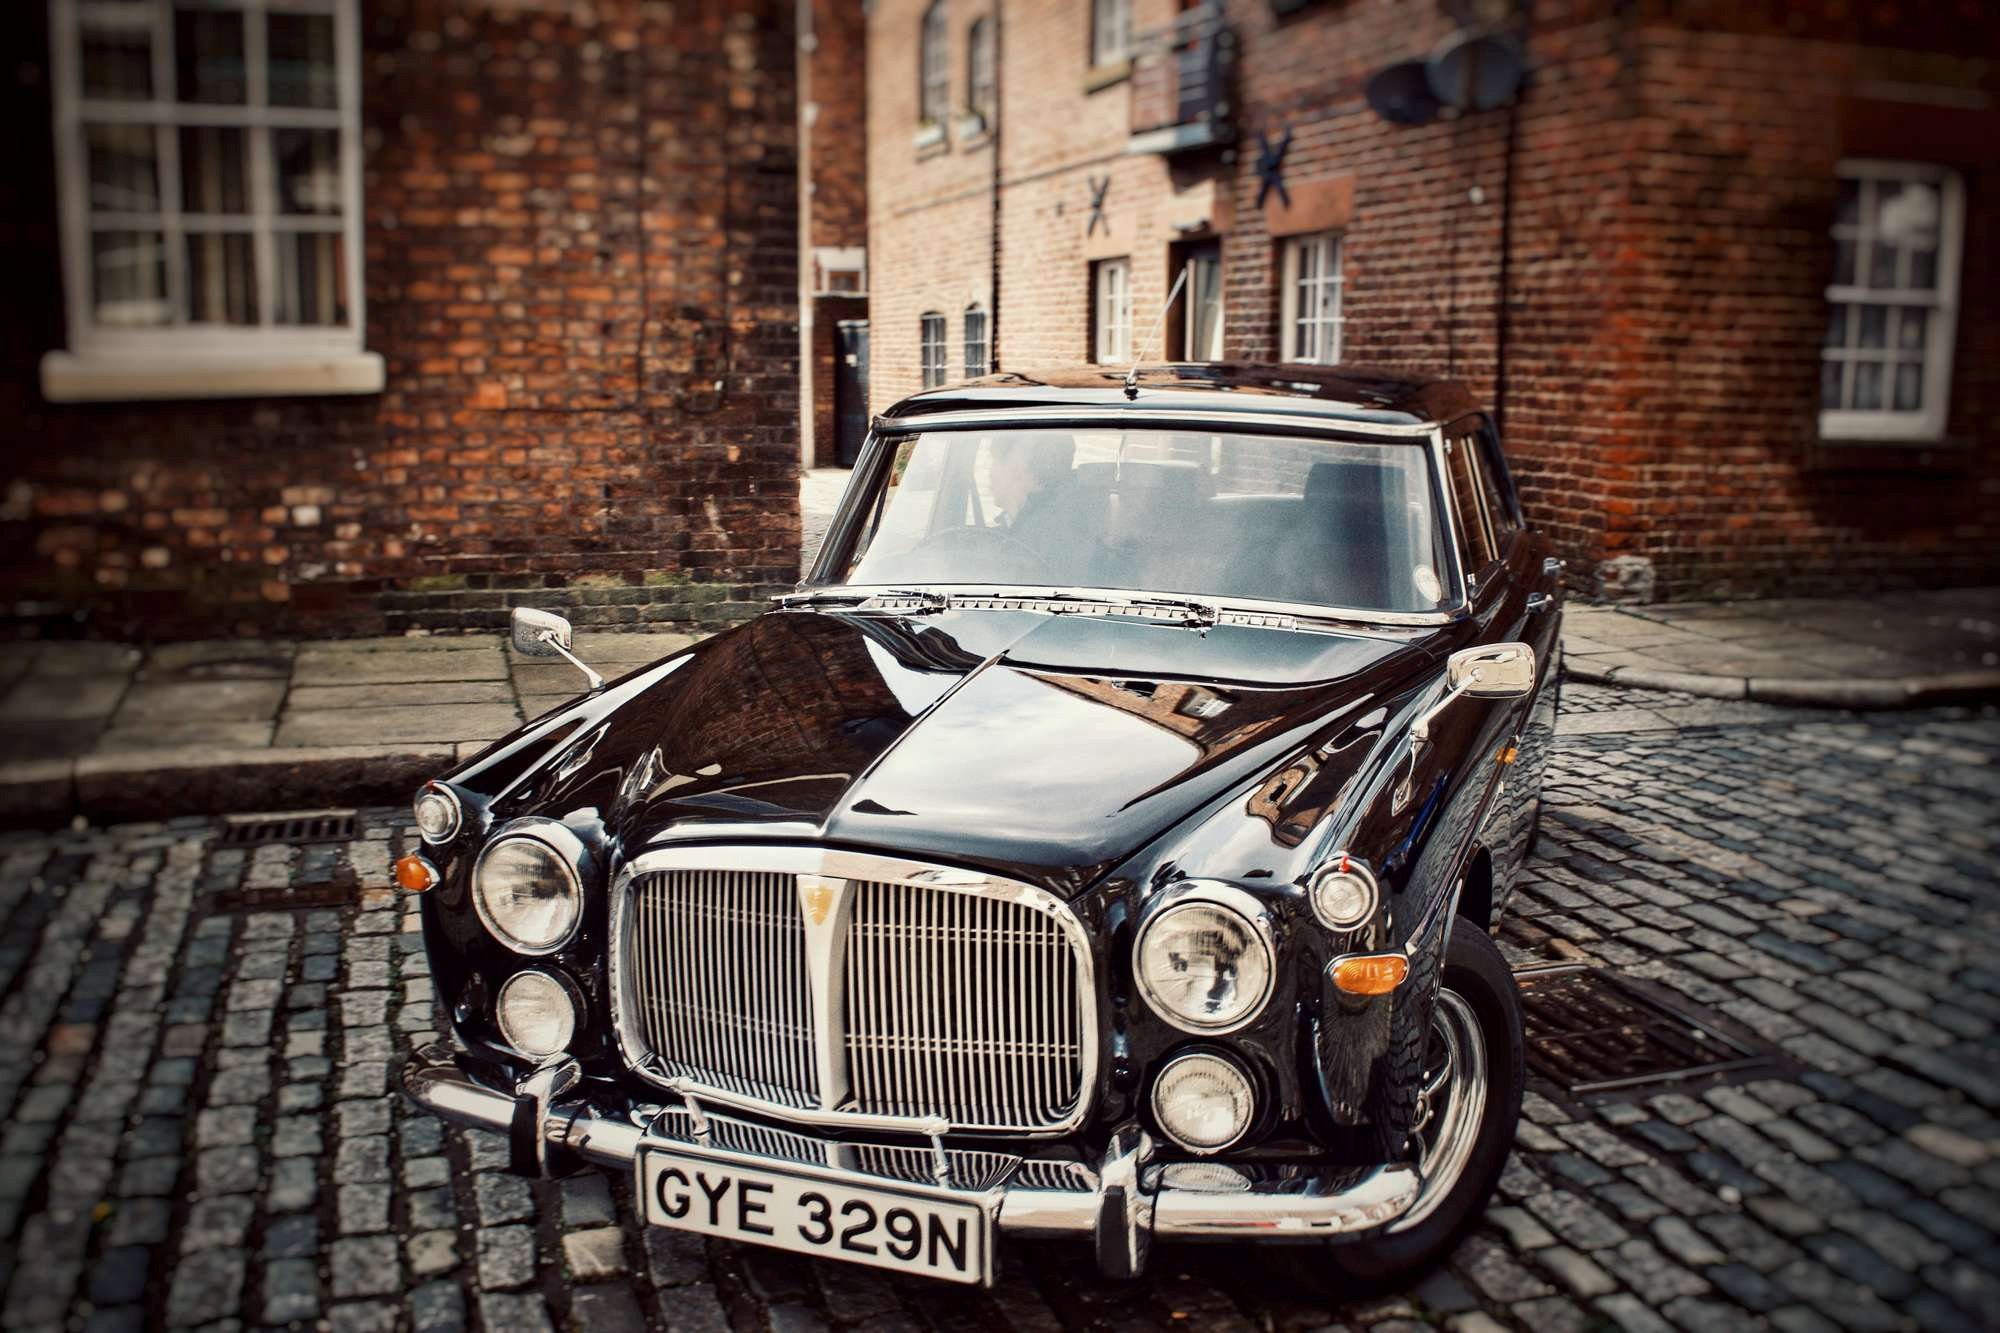 The car that carried Margaret Thatcher to meet the Queen at Buckingham Palace for the first time on May 4, 1979, is expected to fetch up to $54,000 at auction in Royal Leamington Spa which will be held on August 27, 2022. Undated photograph. (Silverstone Auctions,SWNS/Zenger)